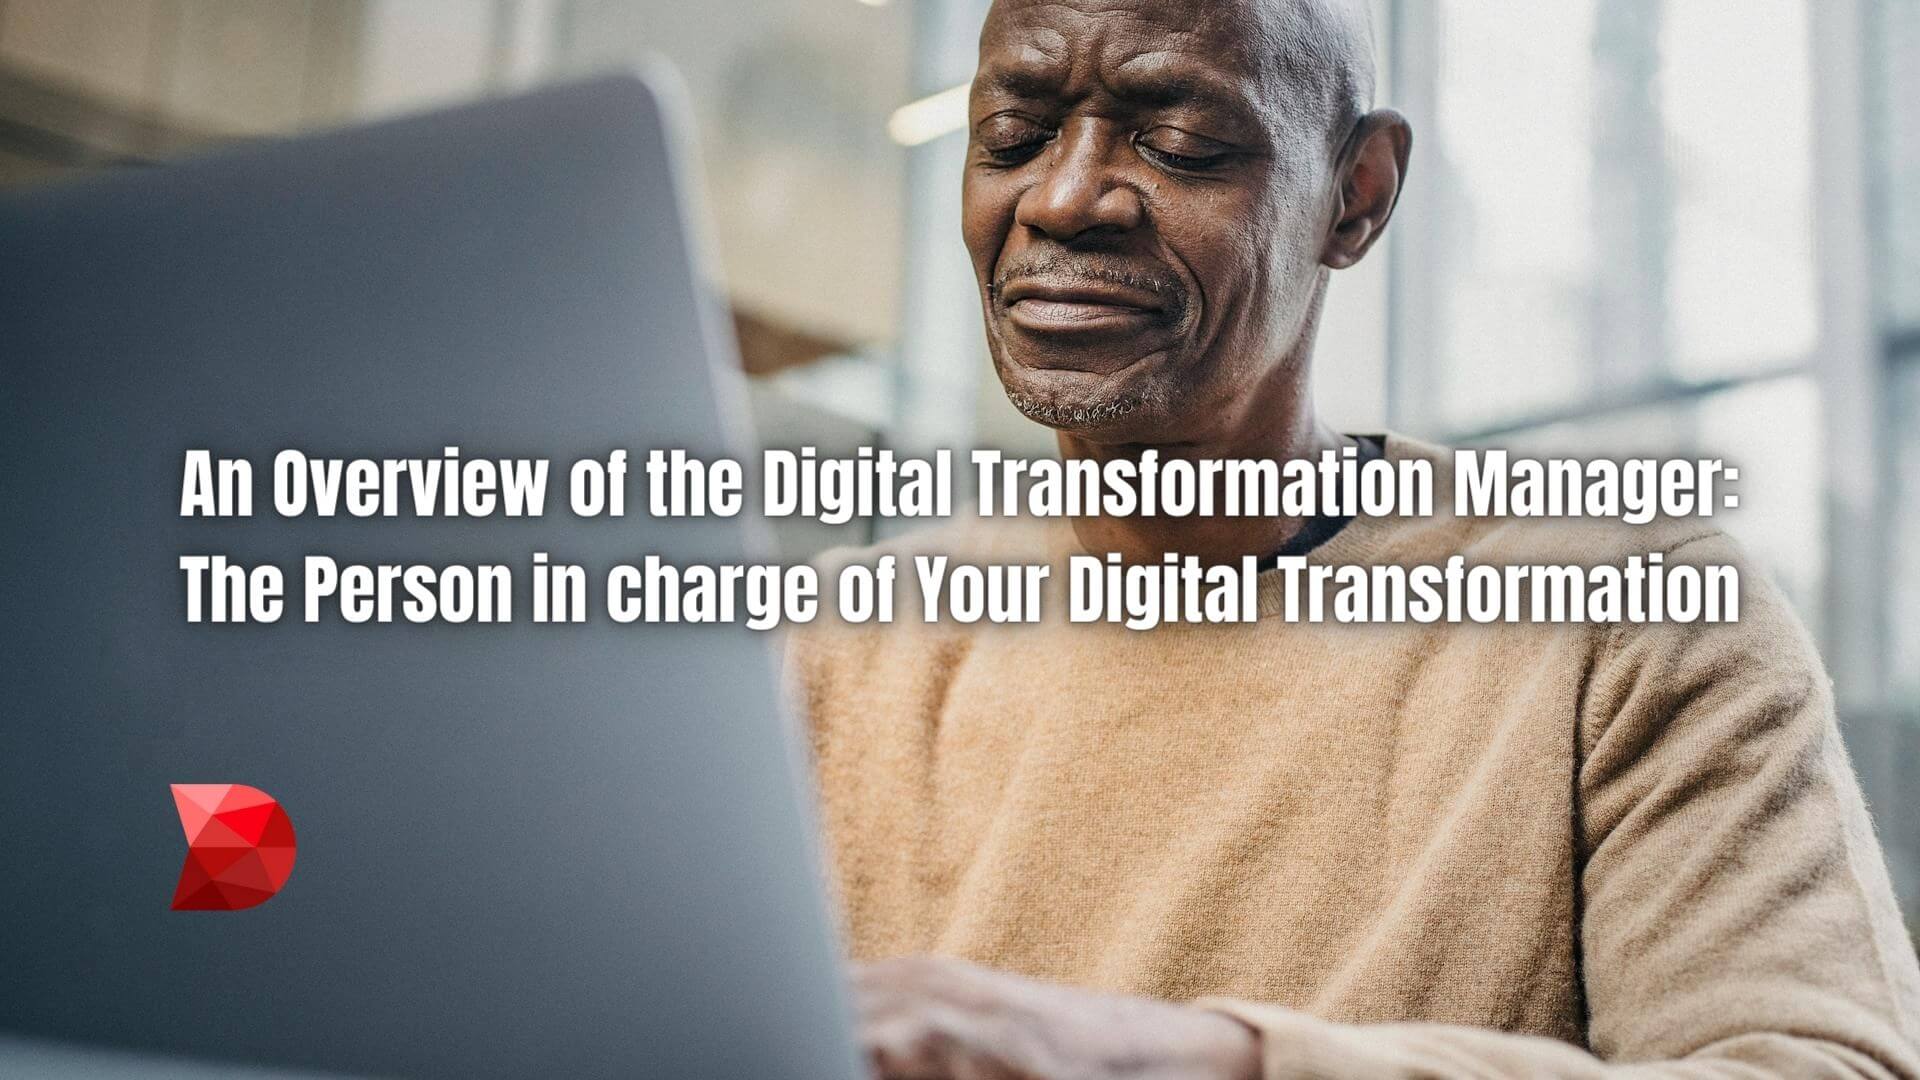 Empower your organization's journey to digital transformation success. Learn about the crucial role of the digital transformation manager.